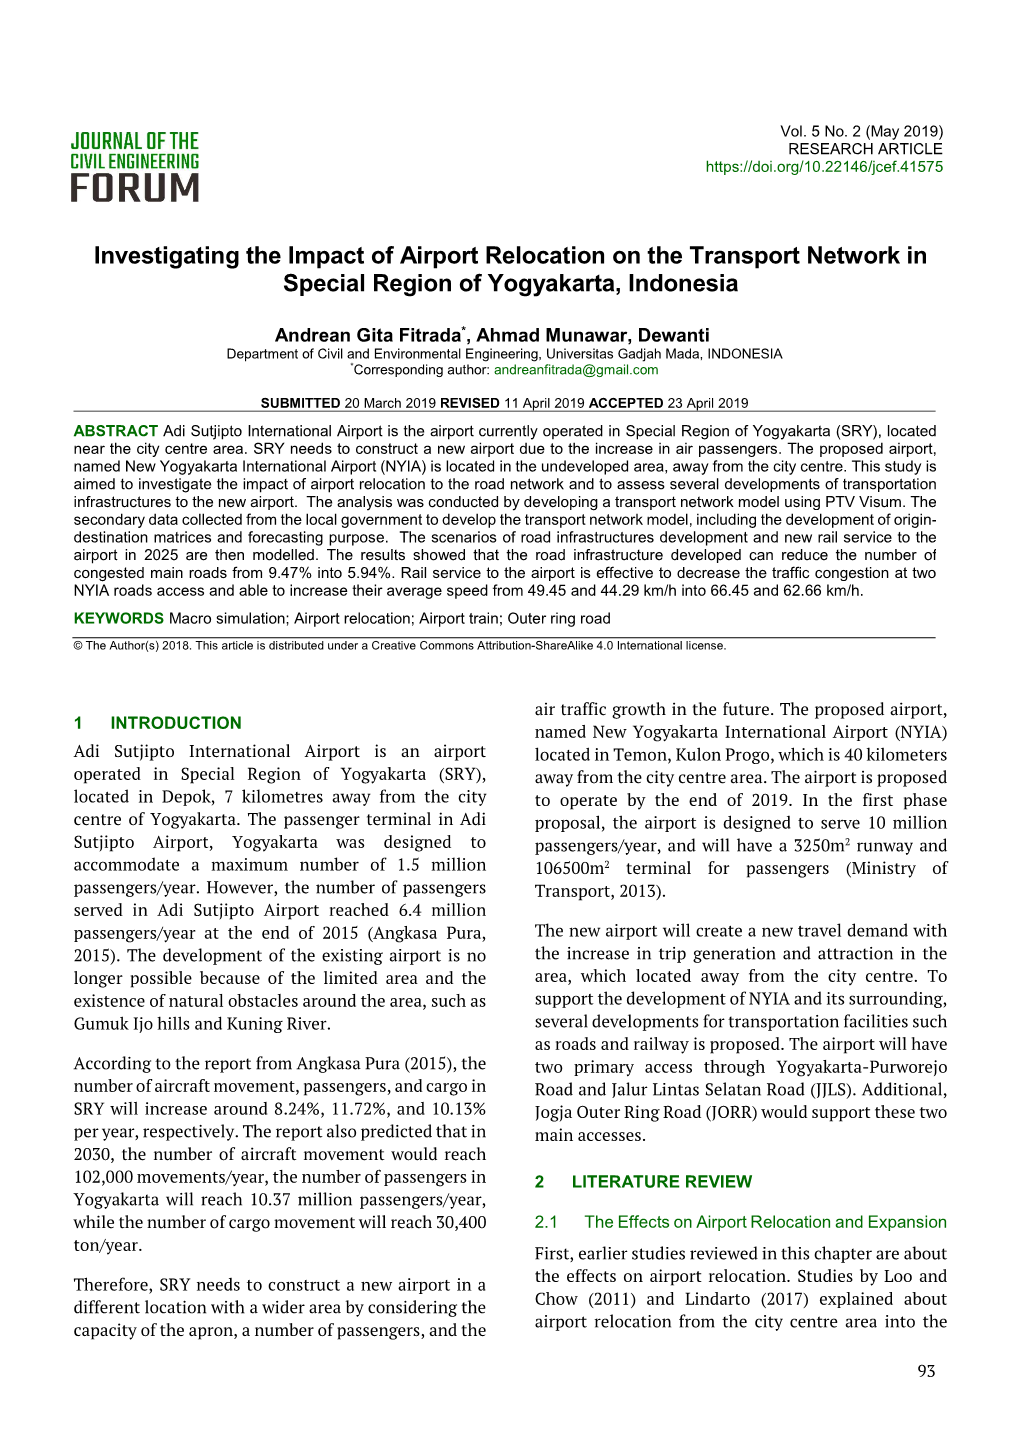 Investigating the Impact of Airport Relocation on the Transport Network in Special Region of Yogyakarta, Indonesia